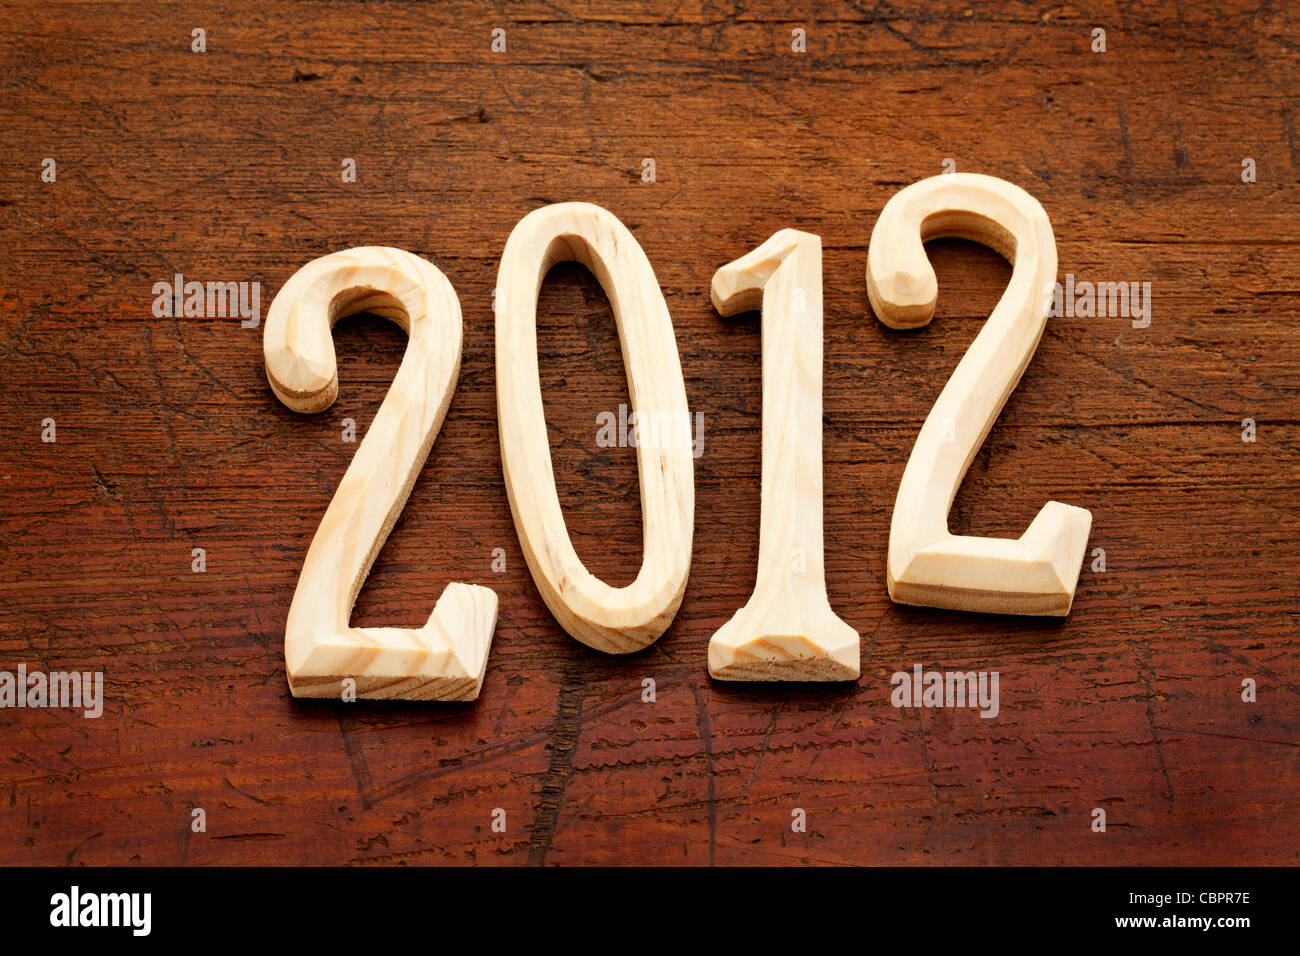 Wooden Text For Year 2032 Stock Photo, Picture and Royalty Free Image.  Image 29212115.